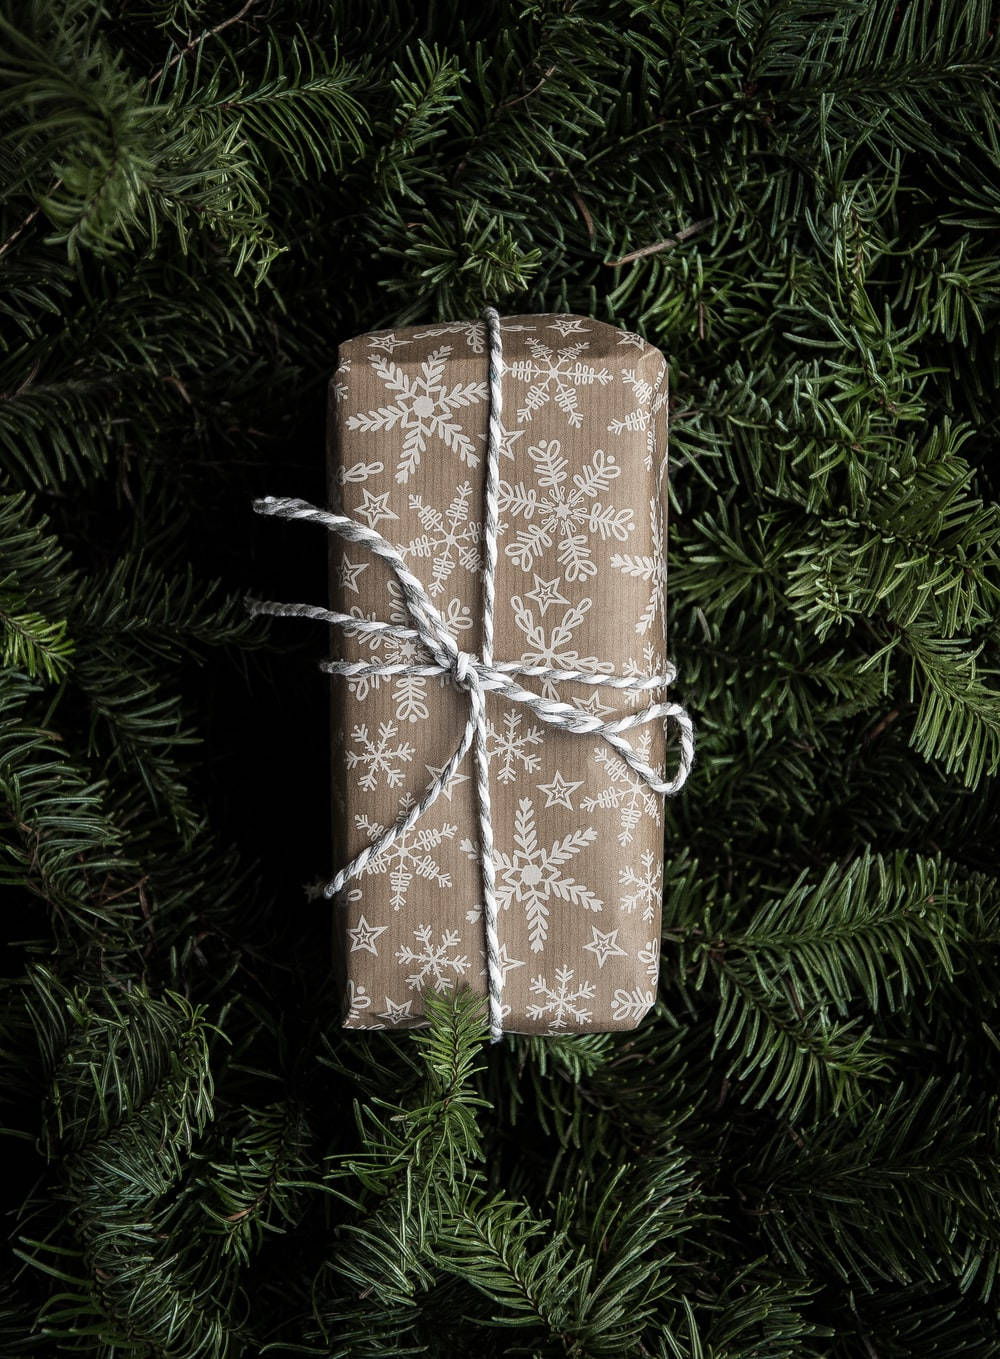 Festive Christmas Gift Wrapped In Brown And White Wallpaper